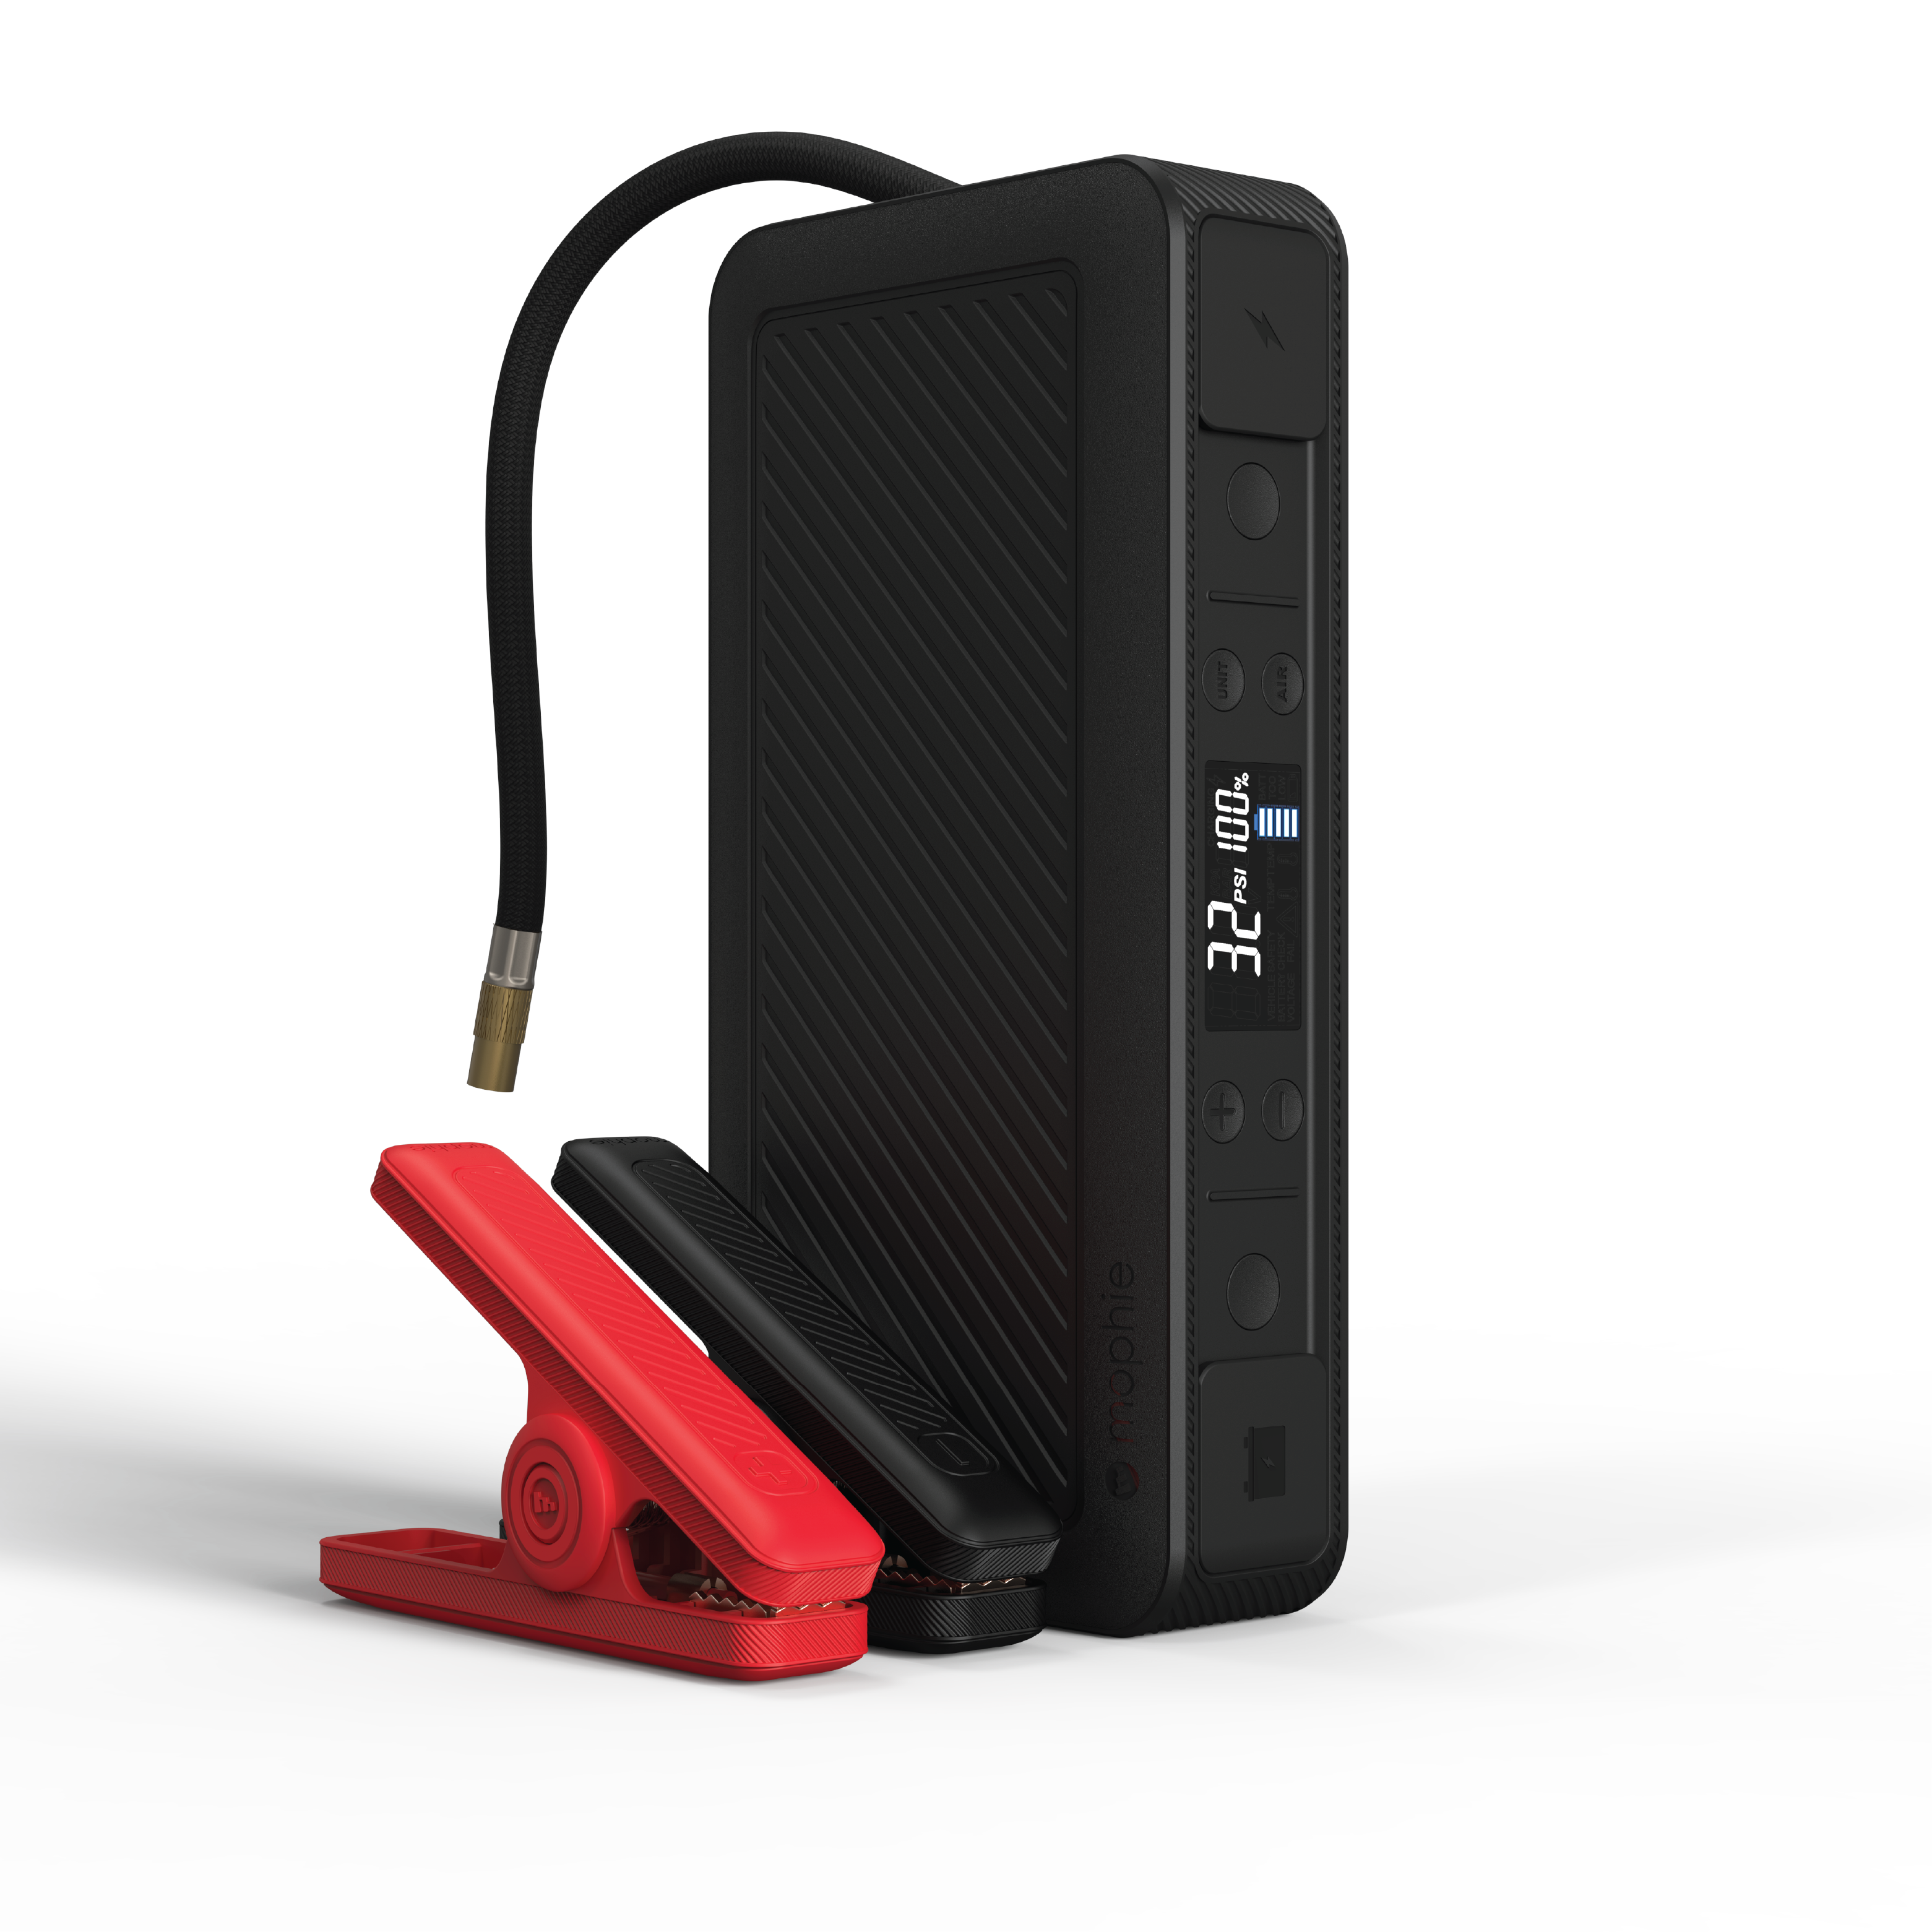 Mophie Powerstation Go Rugged with Air Compressor